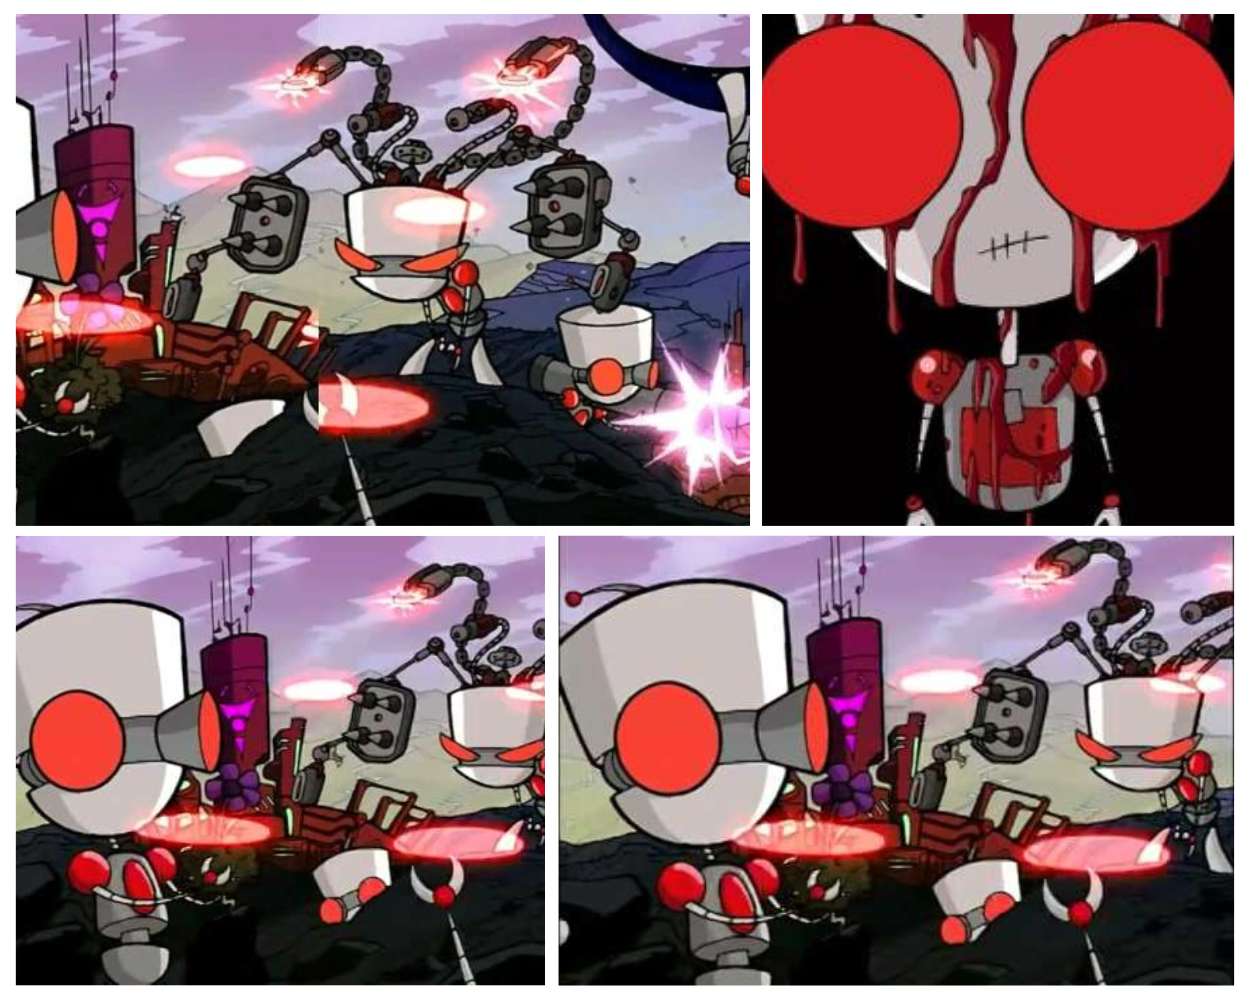 The SIR Units from invader zim